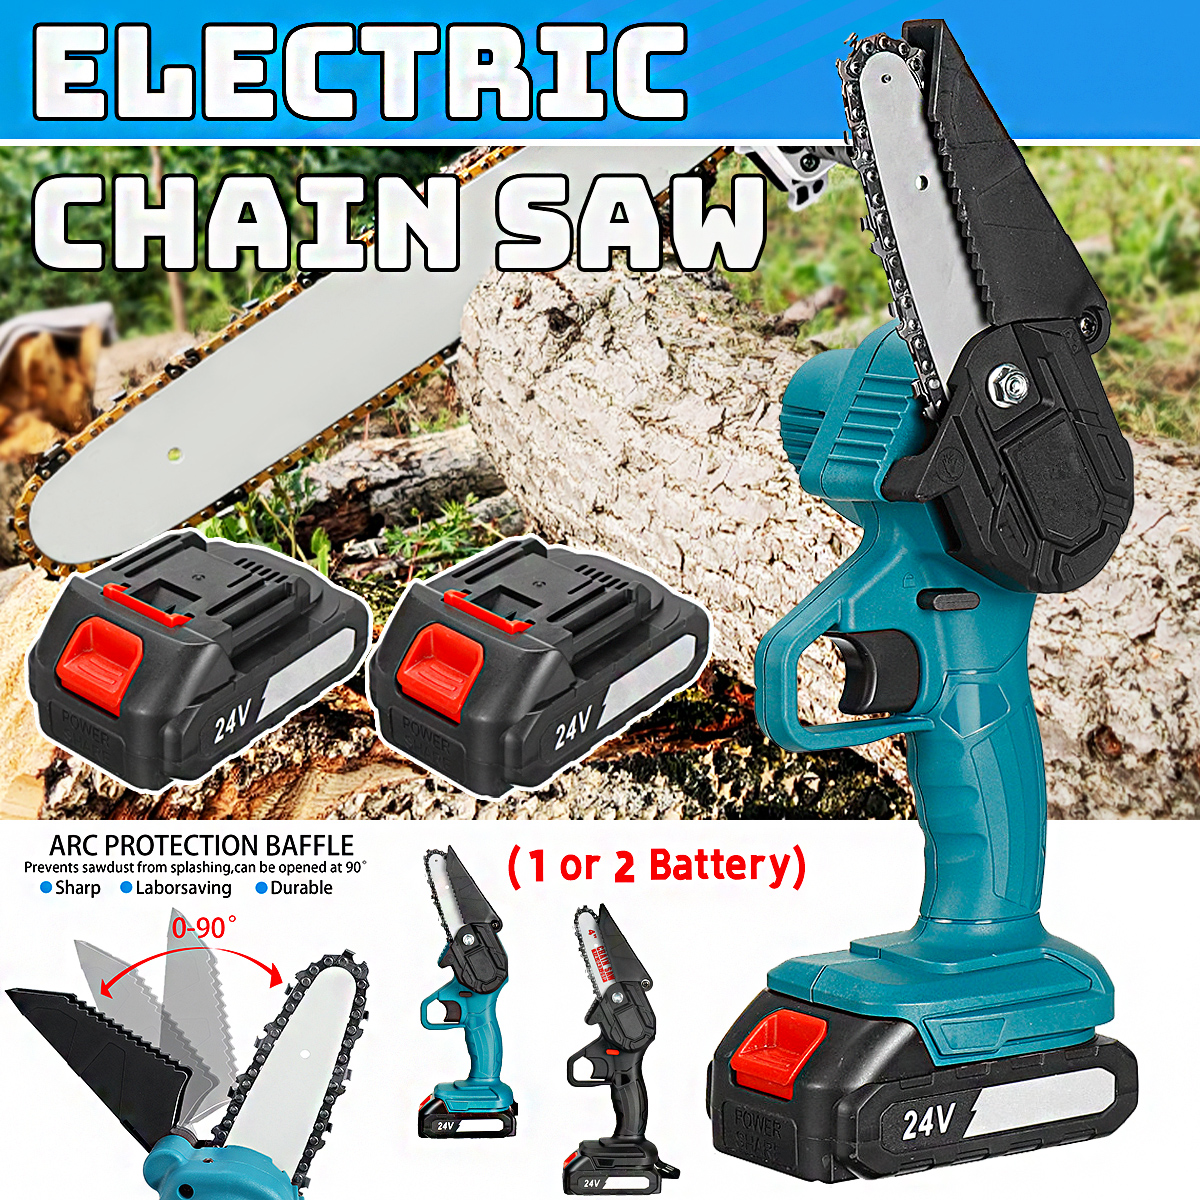 4-Inch-Electric-Chainsaws-Rechargeable-Portable-Chain-Saw-Woodworking-Tool-Wood-Cutter-W-12-Battery-1860314-1